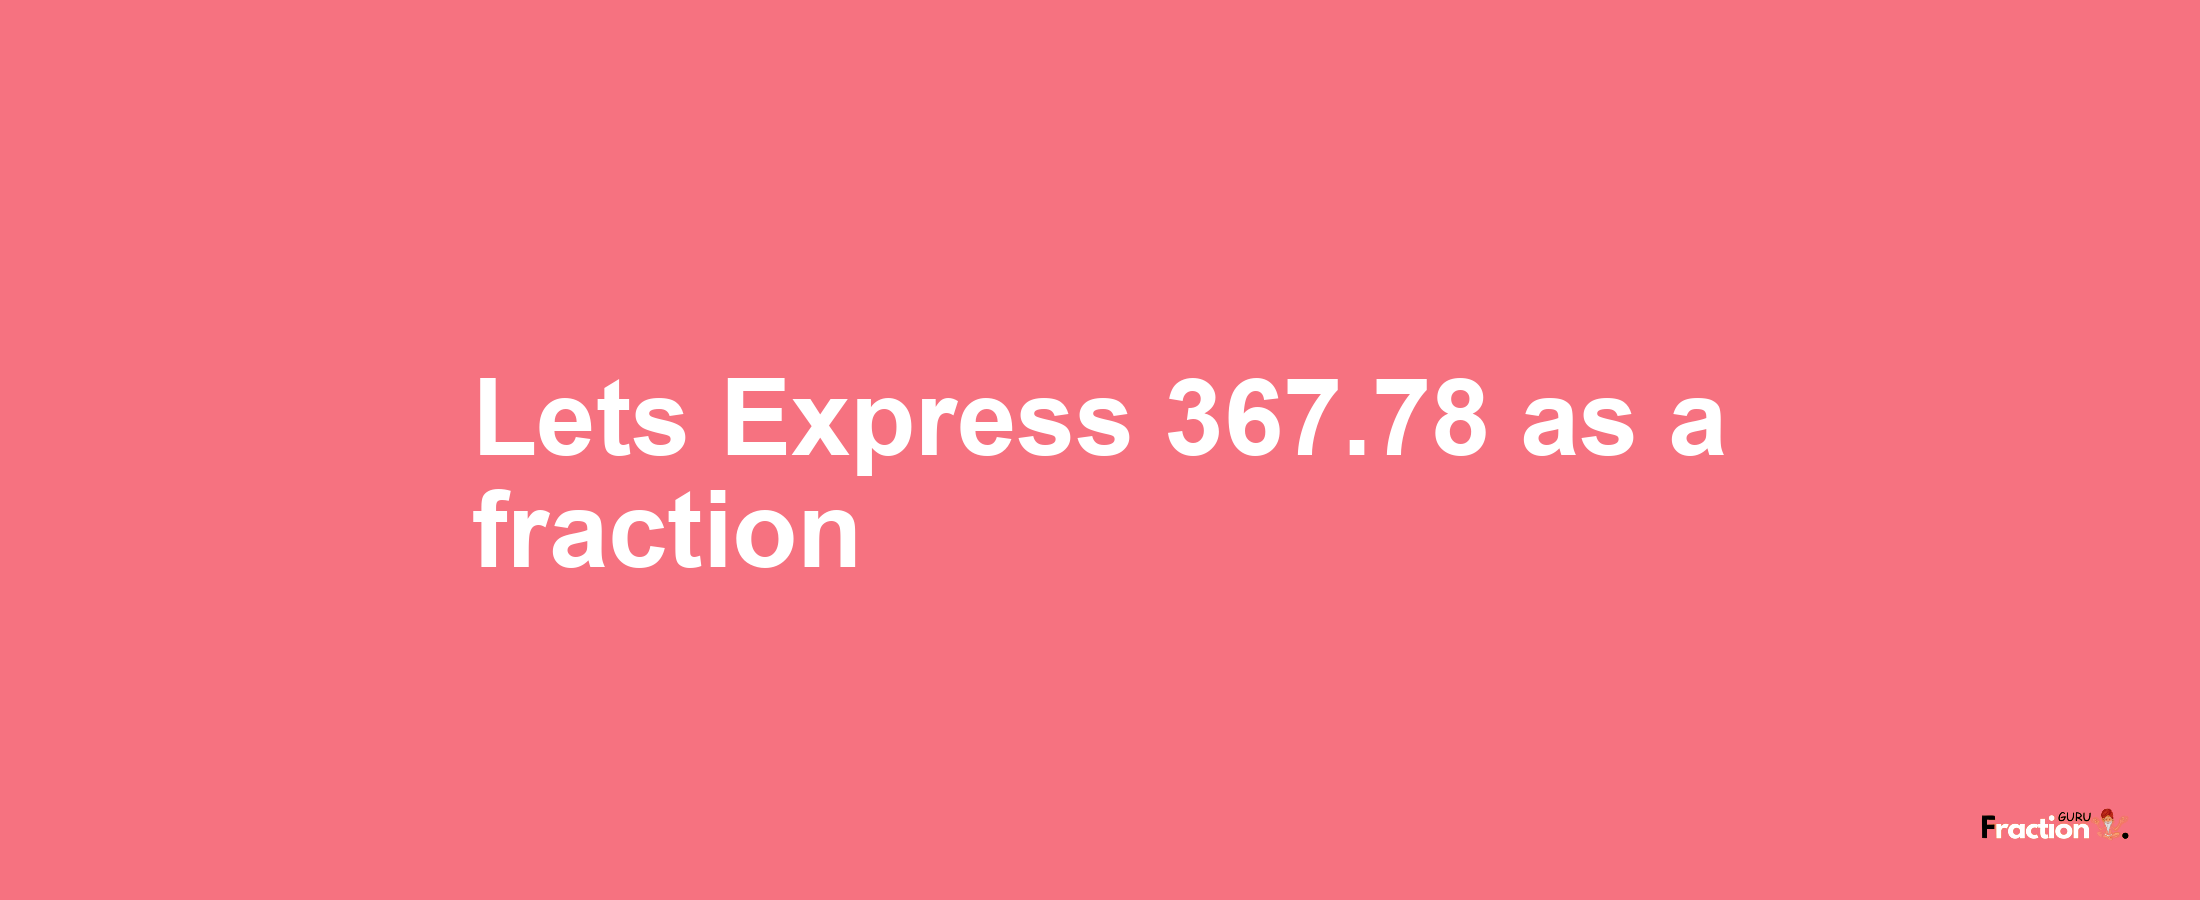 Lets Express 367.78 as afraction